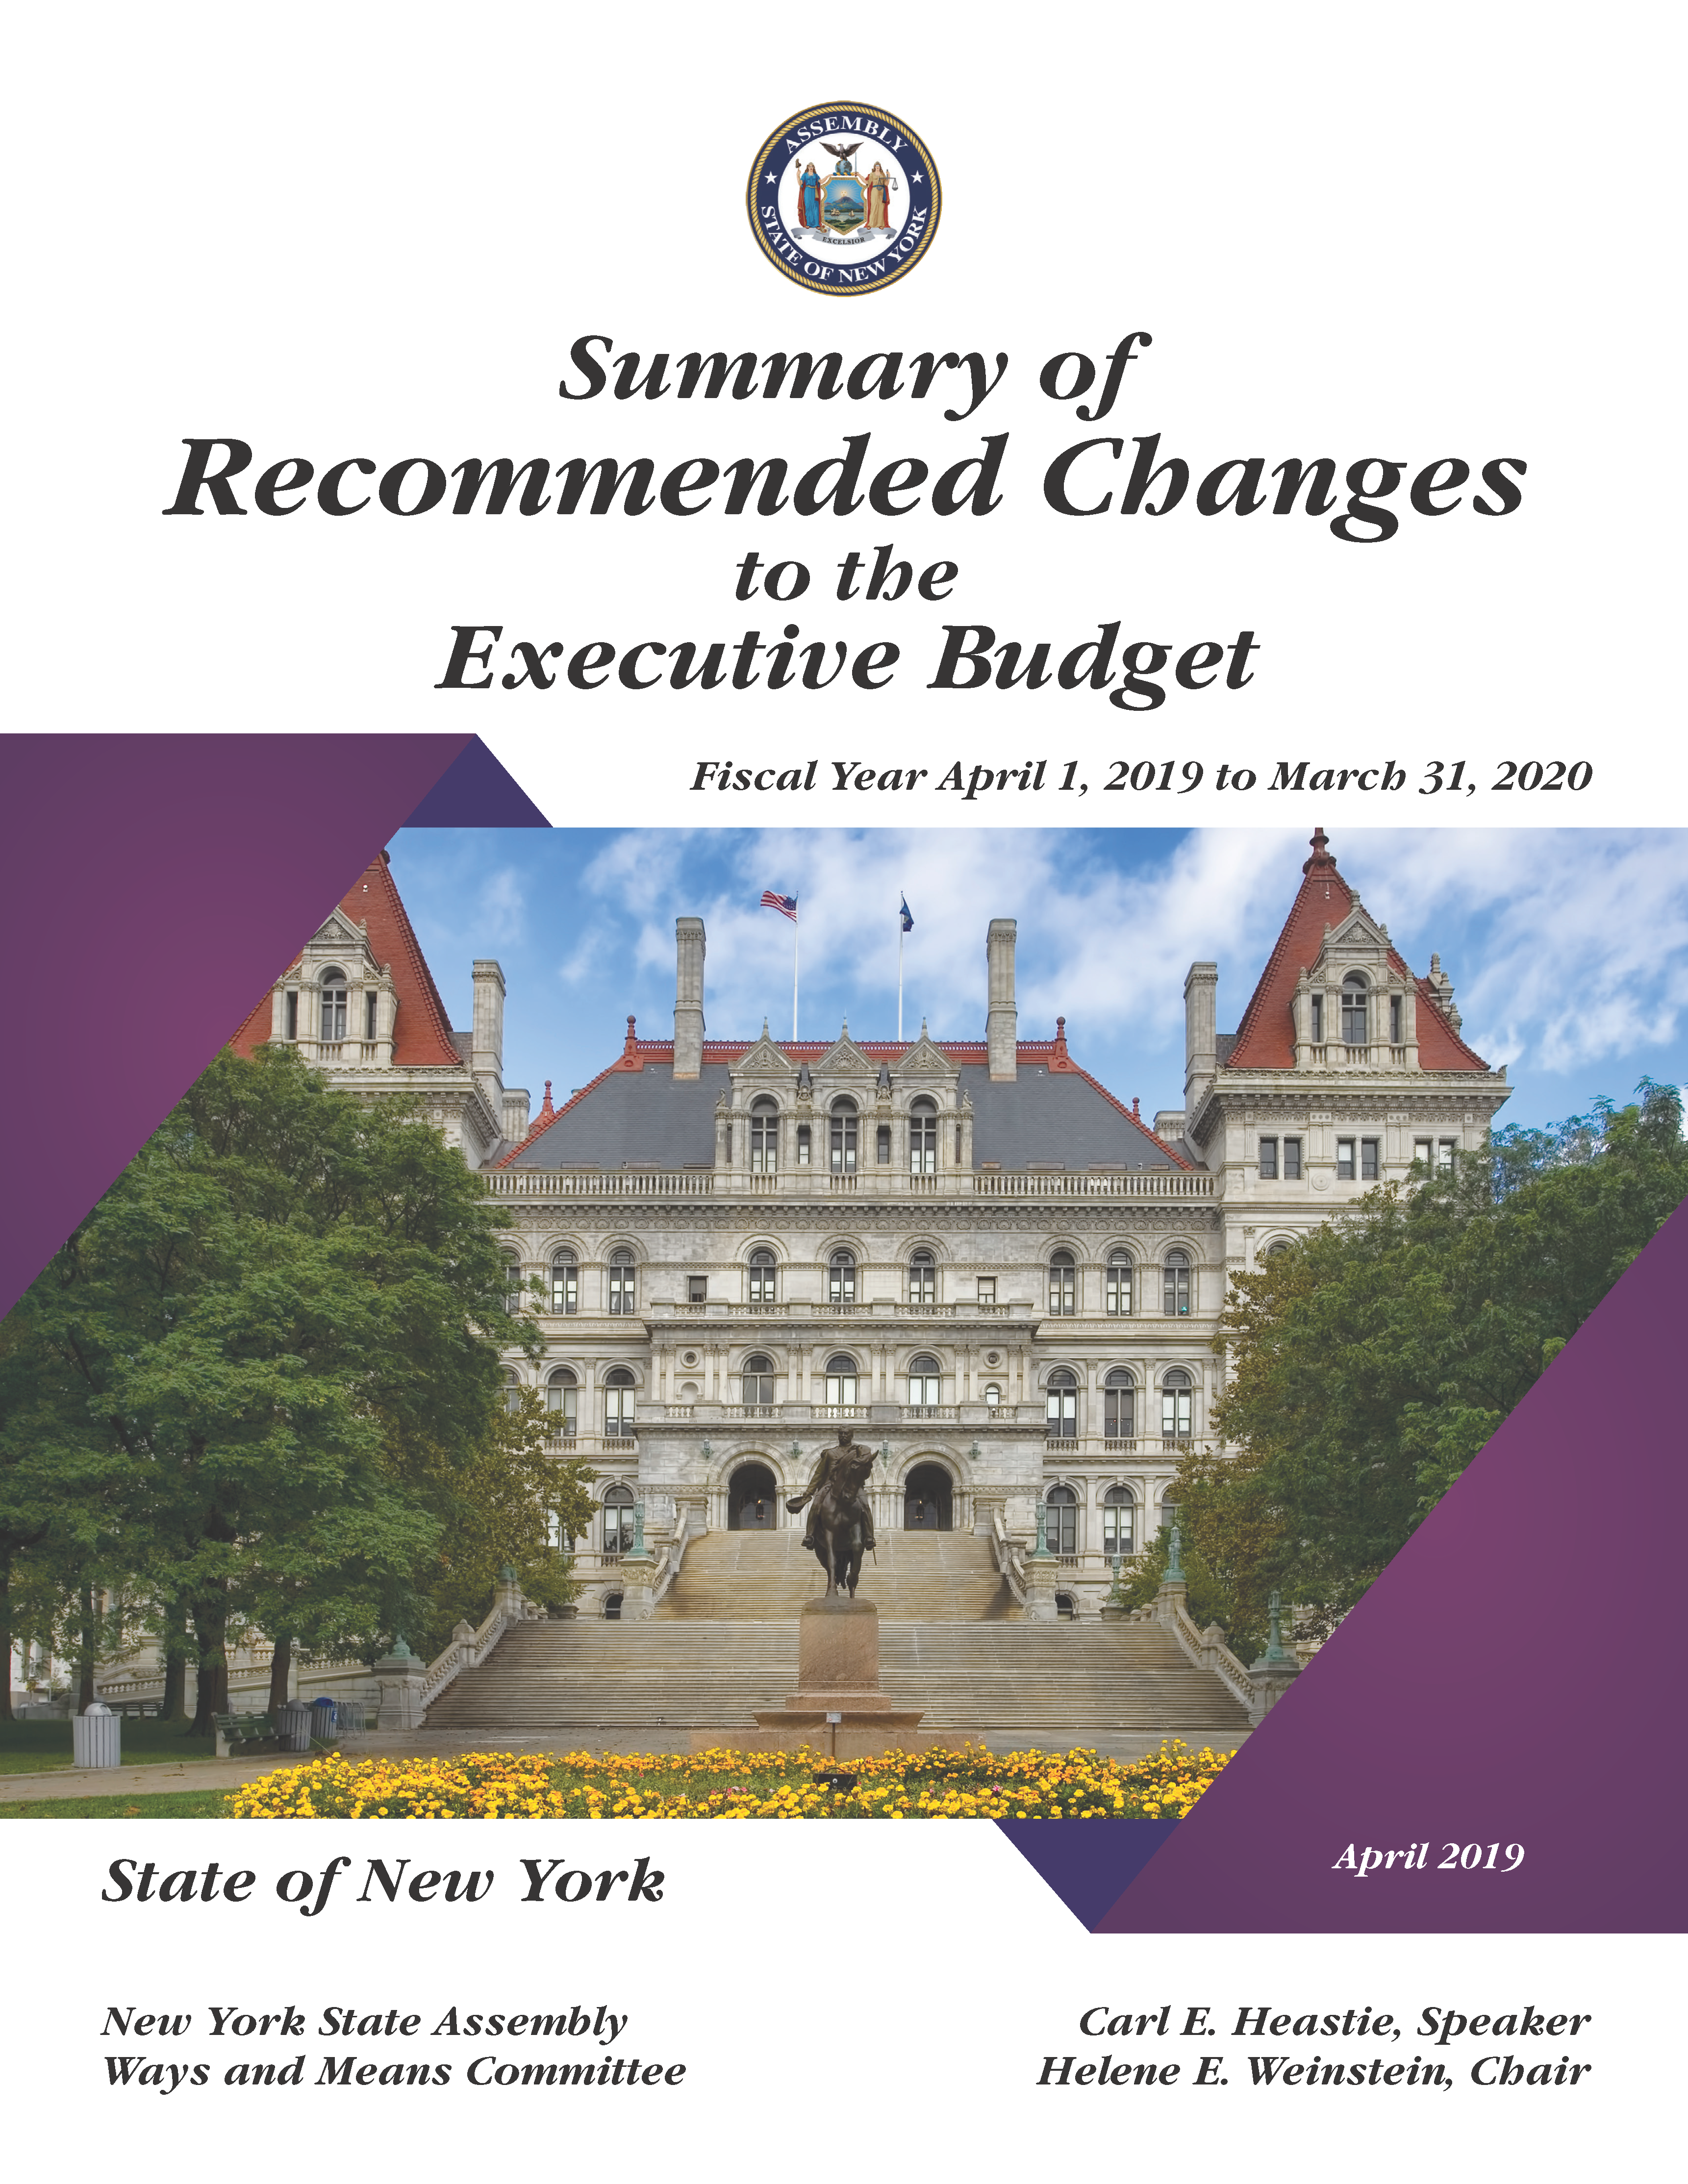 Summary of Recommended Changes to the Executive Budget